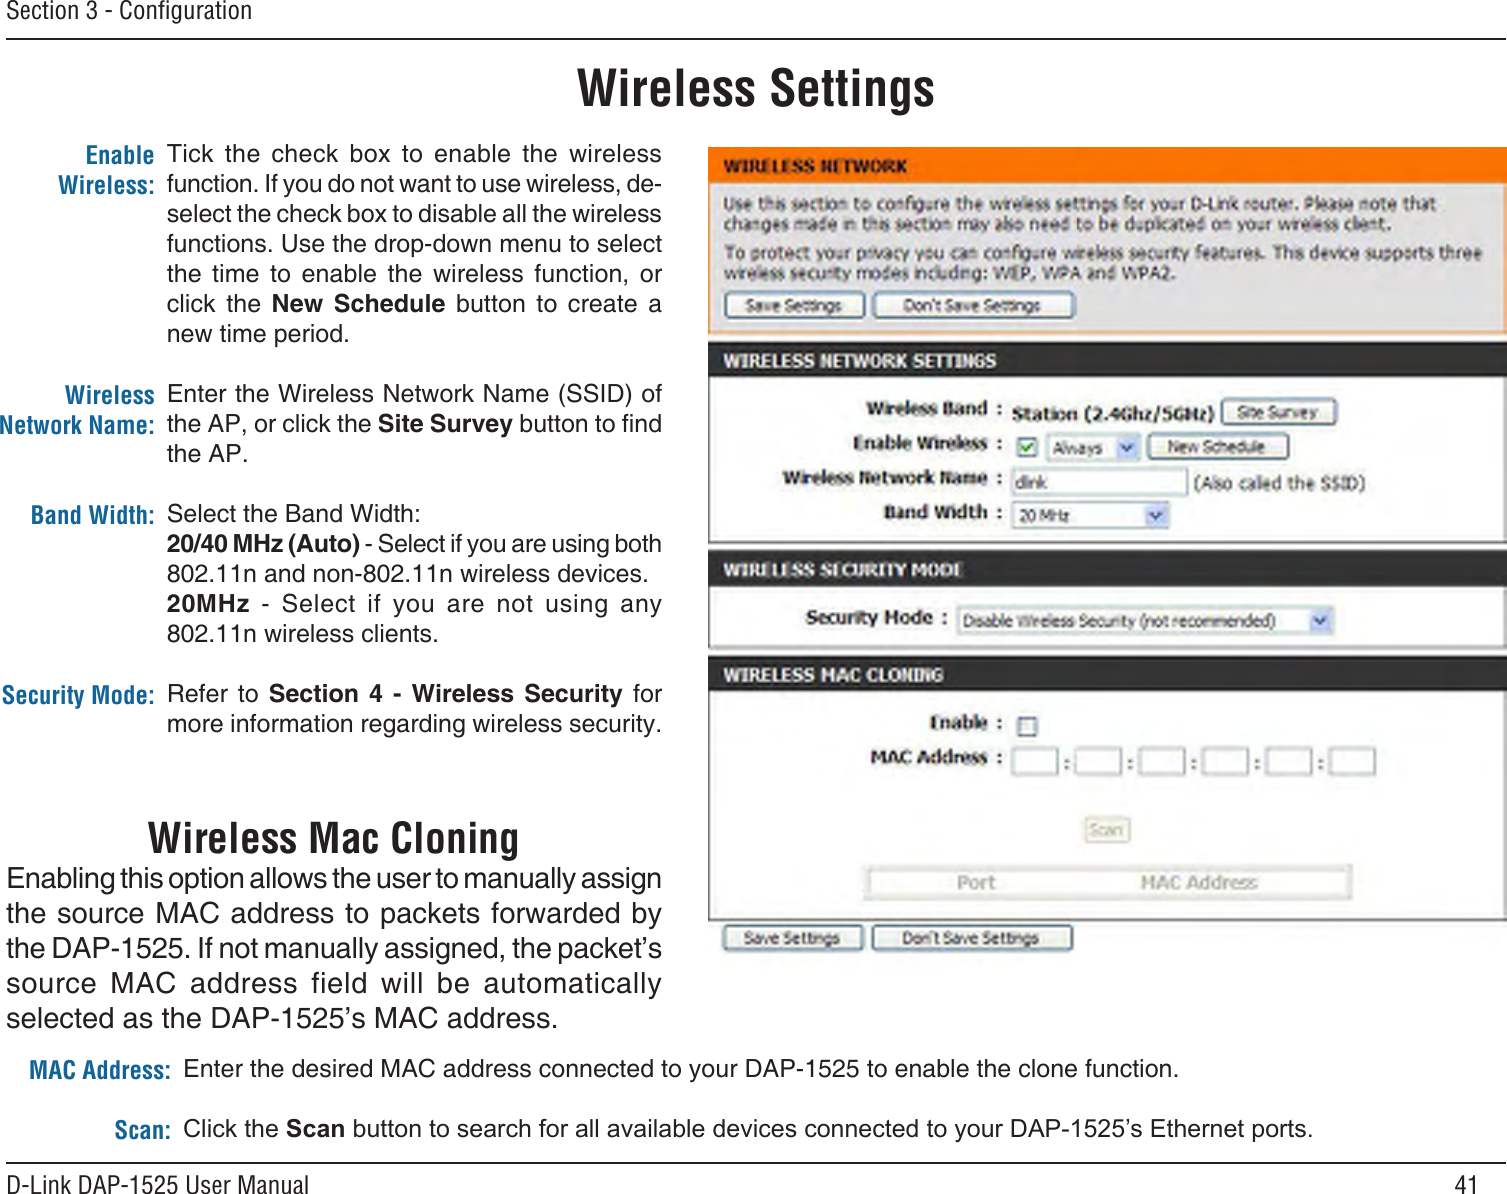 41D-Link DAP-1525 User ManualSection 3 - ConﬁgurationWireless SettingsTick  the  check  box  to  enable  the  wireless function. If you do not want to use wireless, de-select the check box to disable all the wireless functions. Use the drop-down menu to select the  time  to  enable  the  wireless  function,  or click  the  New  Schedule  button  to  create  a  new time period.Enter the Wireless Network Name (SSID) of the AP, or click the Site Survey button to nd the AP.Select the Band Width:20/40 MHz (Auto) - Select if you are using both 802.11n and non-802.11n wireless devices.20MHz  -  Select  if  you  are  not  using  any 802.11n wireless clients.Refer  to  Section  4  -  Wireless  Security  for more information regarding wireless security.Enable Wireless:Wireless Network Name:Band Width:Security Mode:Wireless Mac CloningEnabling this option allows the user to manually assign the source MAC address to packets forwarded by the DAP-1525. If not manually assigned, the packet’s source  MAC  address  field  will  be  automatically selected as the DAP-1525’s MAC address.Enter the desired MAC address connected to your DAP-1525 to enable the clone function.ClicktheScanbuttontosearchforallavailabledevicesconnectedtoyourDAP-1525’sEthernetports.MAC Address:Scan: